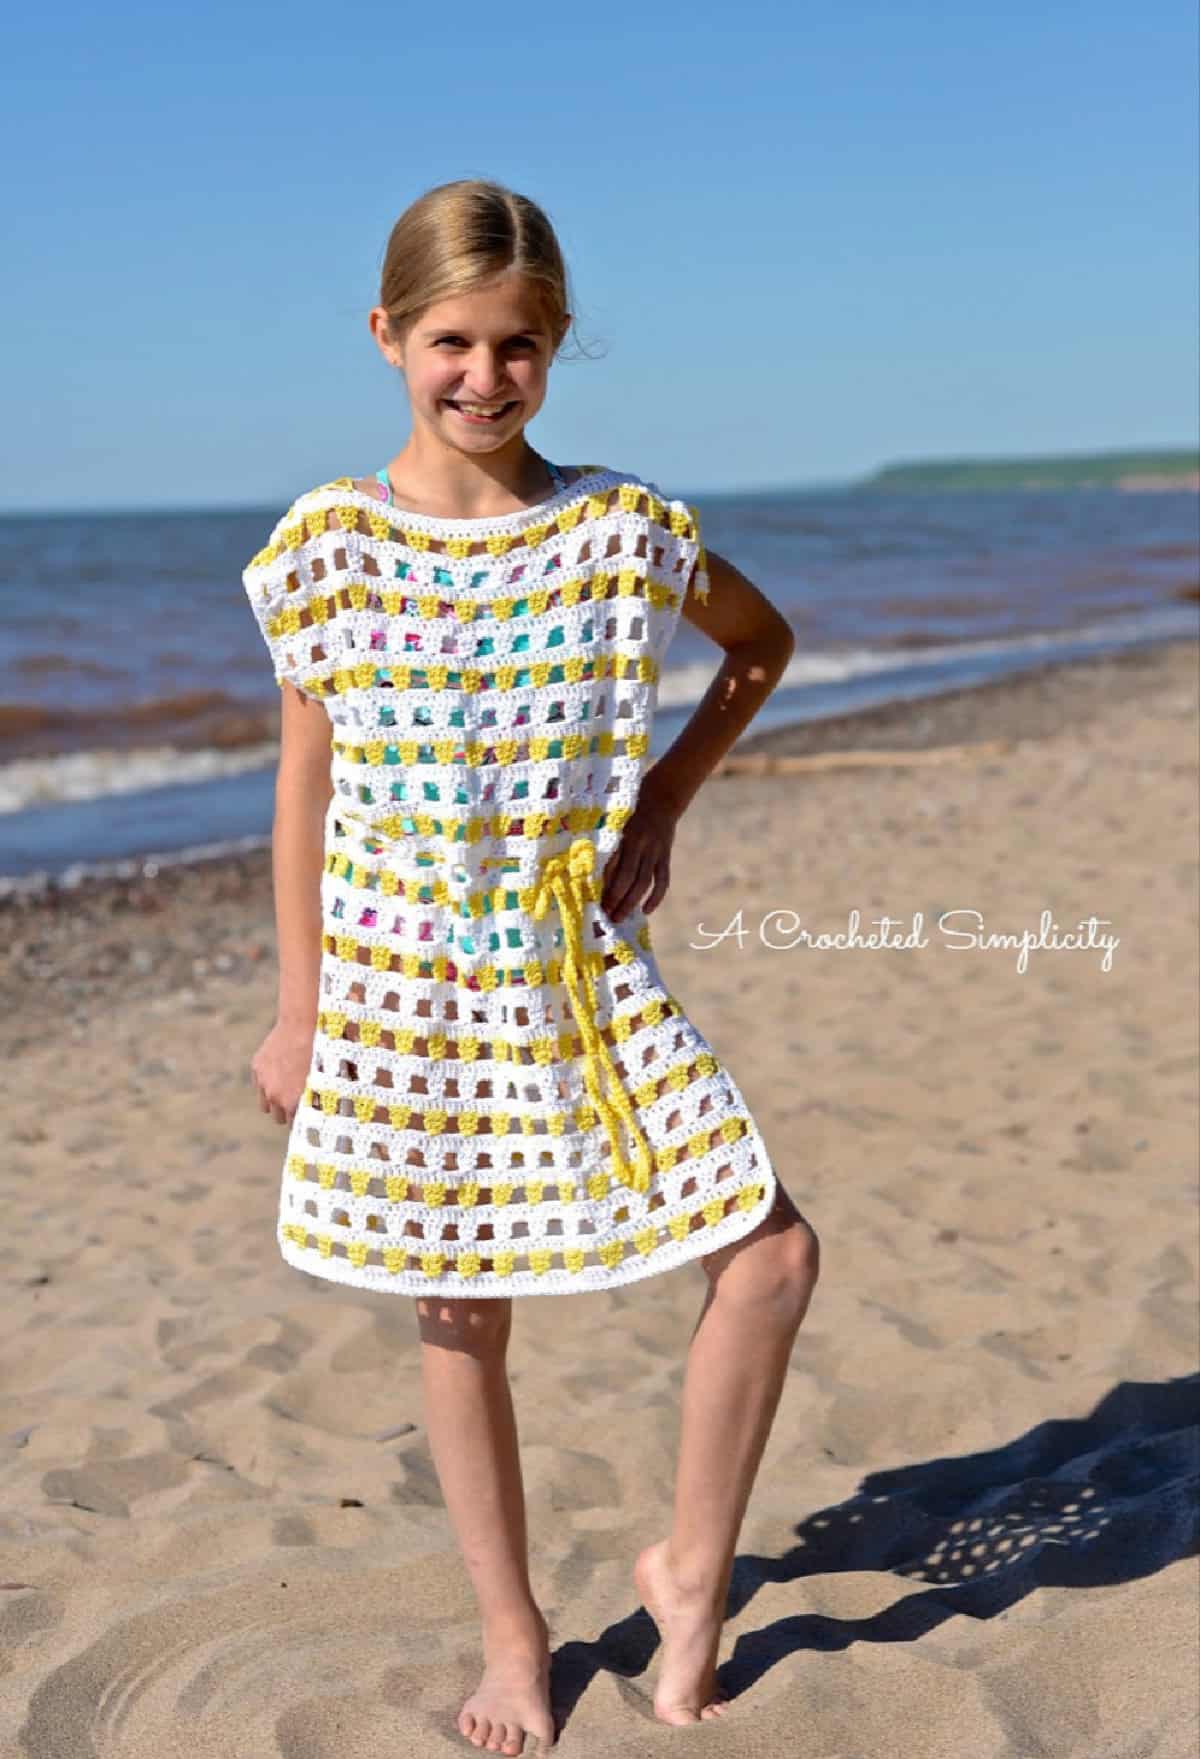 young girl modeling a white and yellow crochet beach cover up